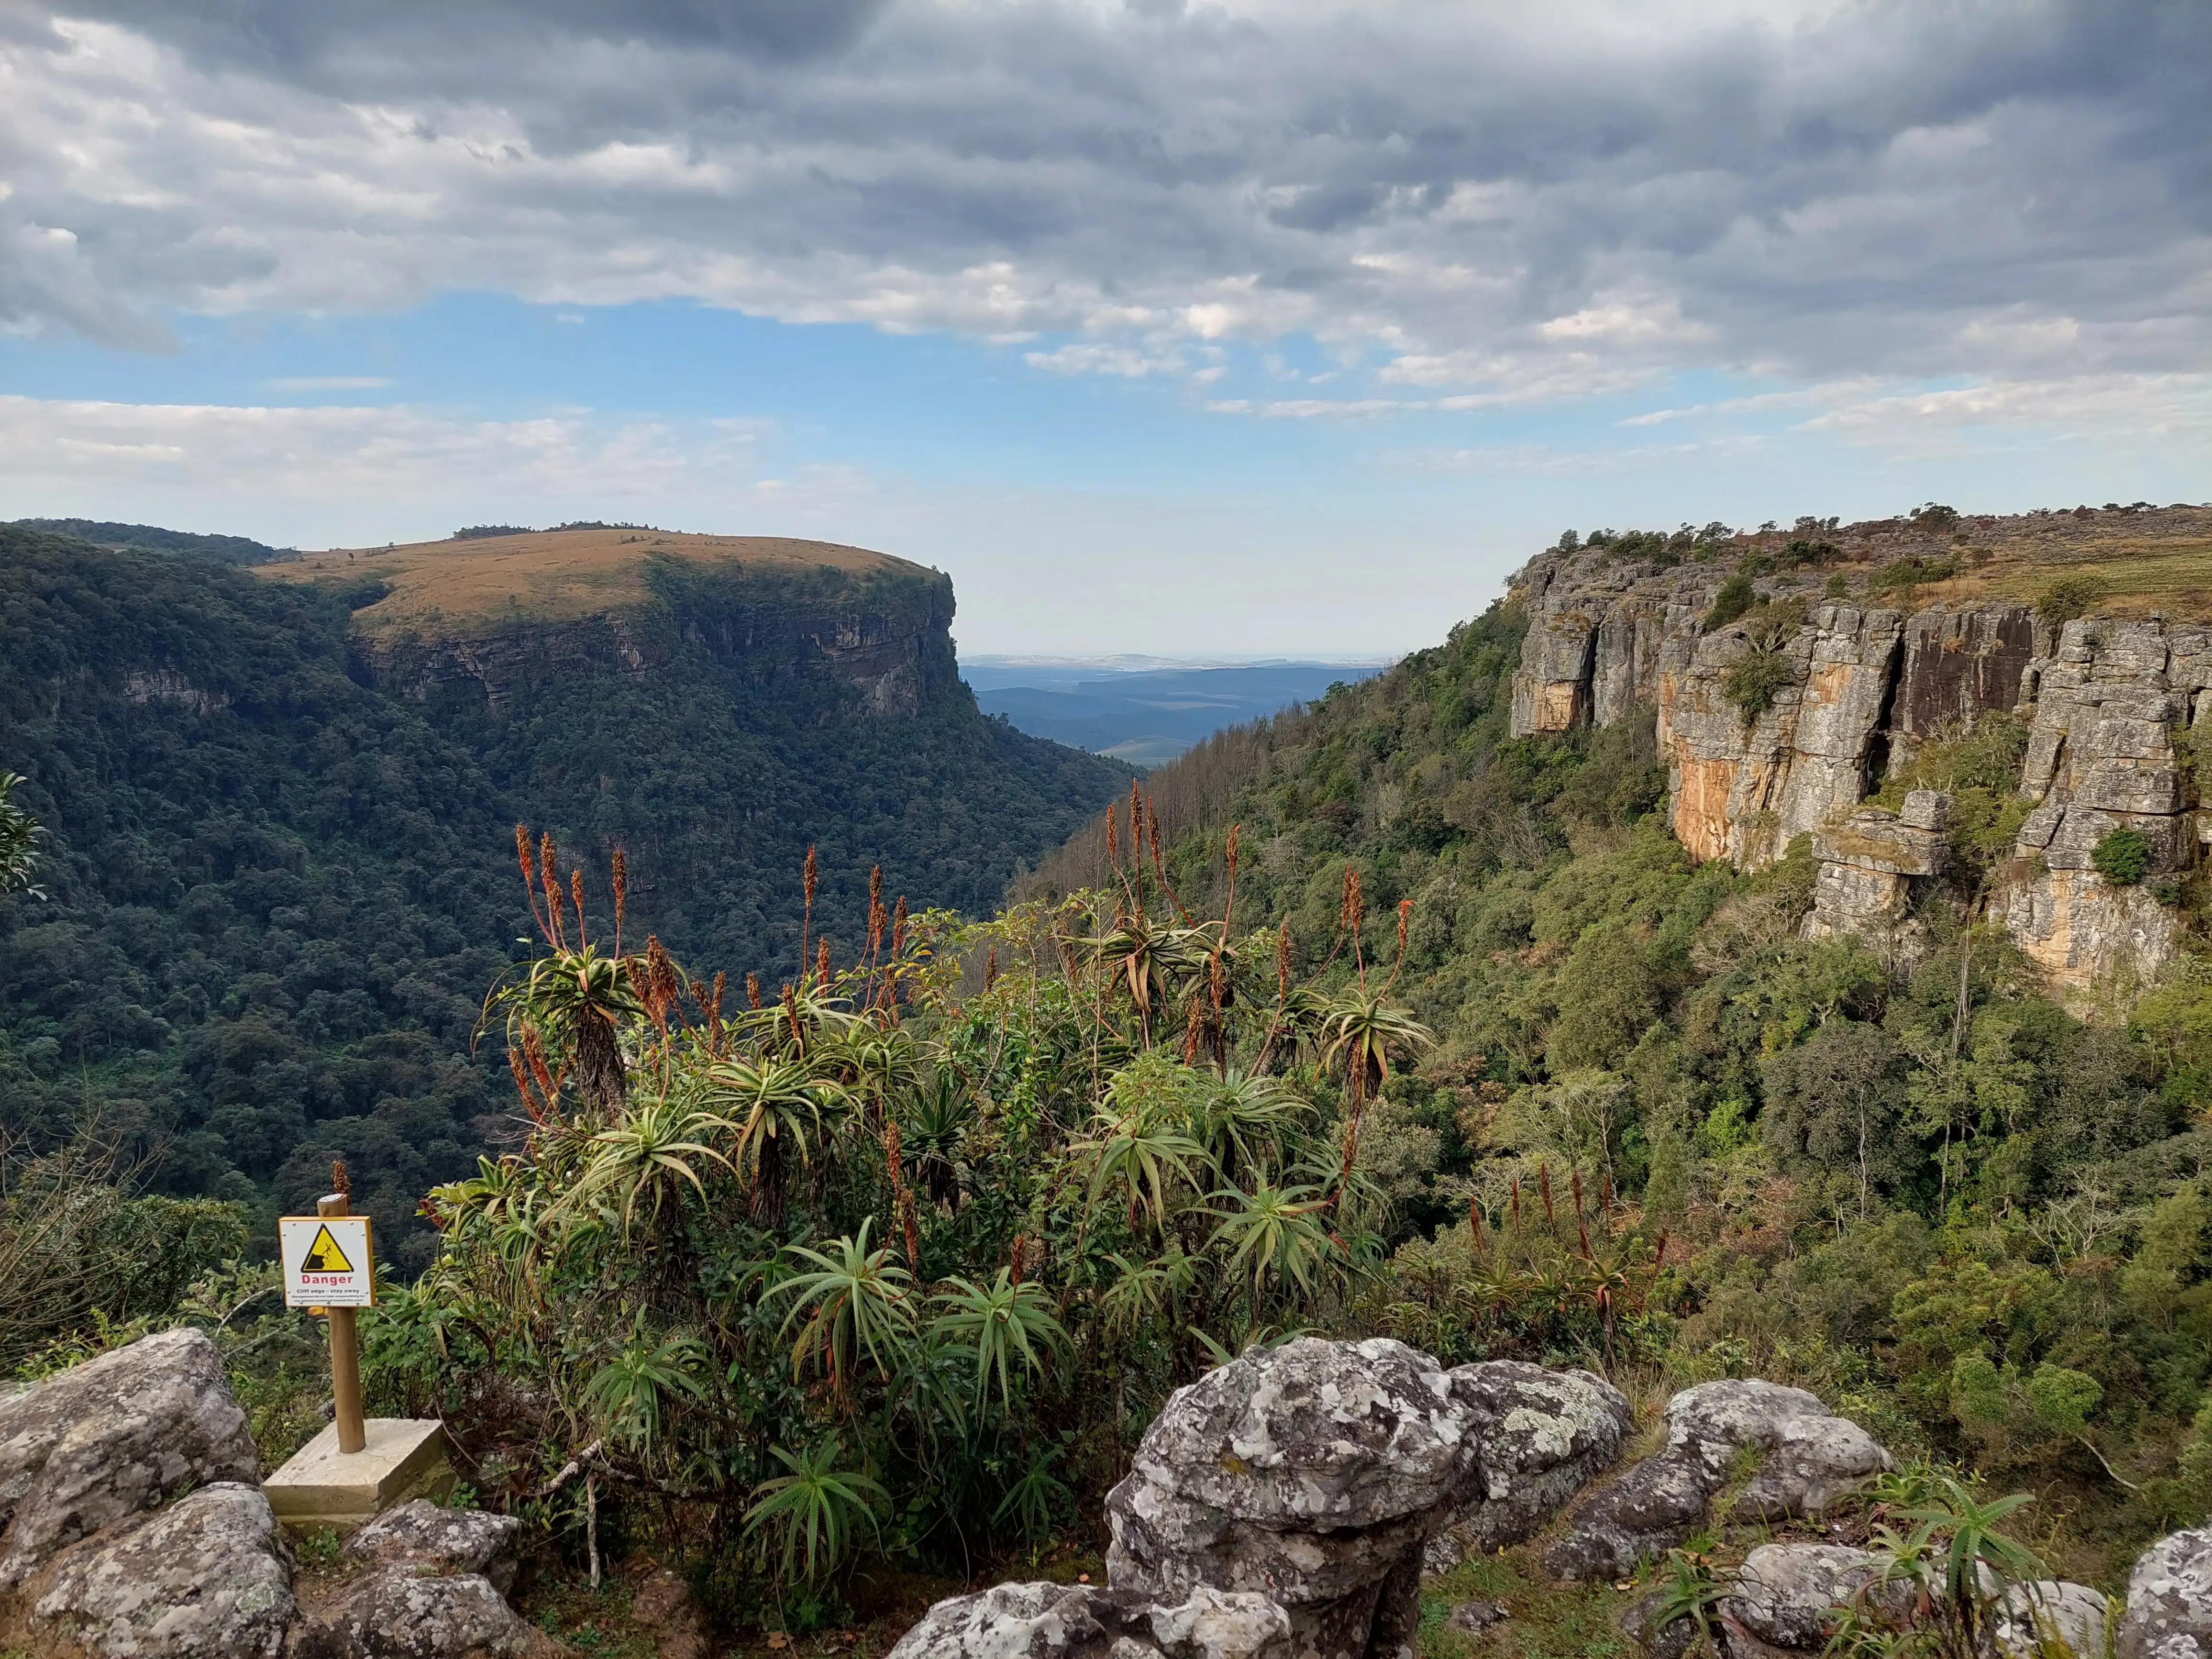 A Kruger Adventure: A Guide to Graskop’s Blyde River Canyon